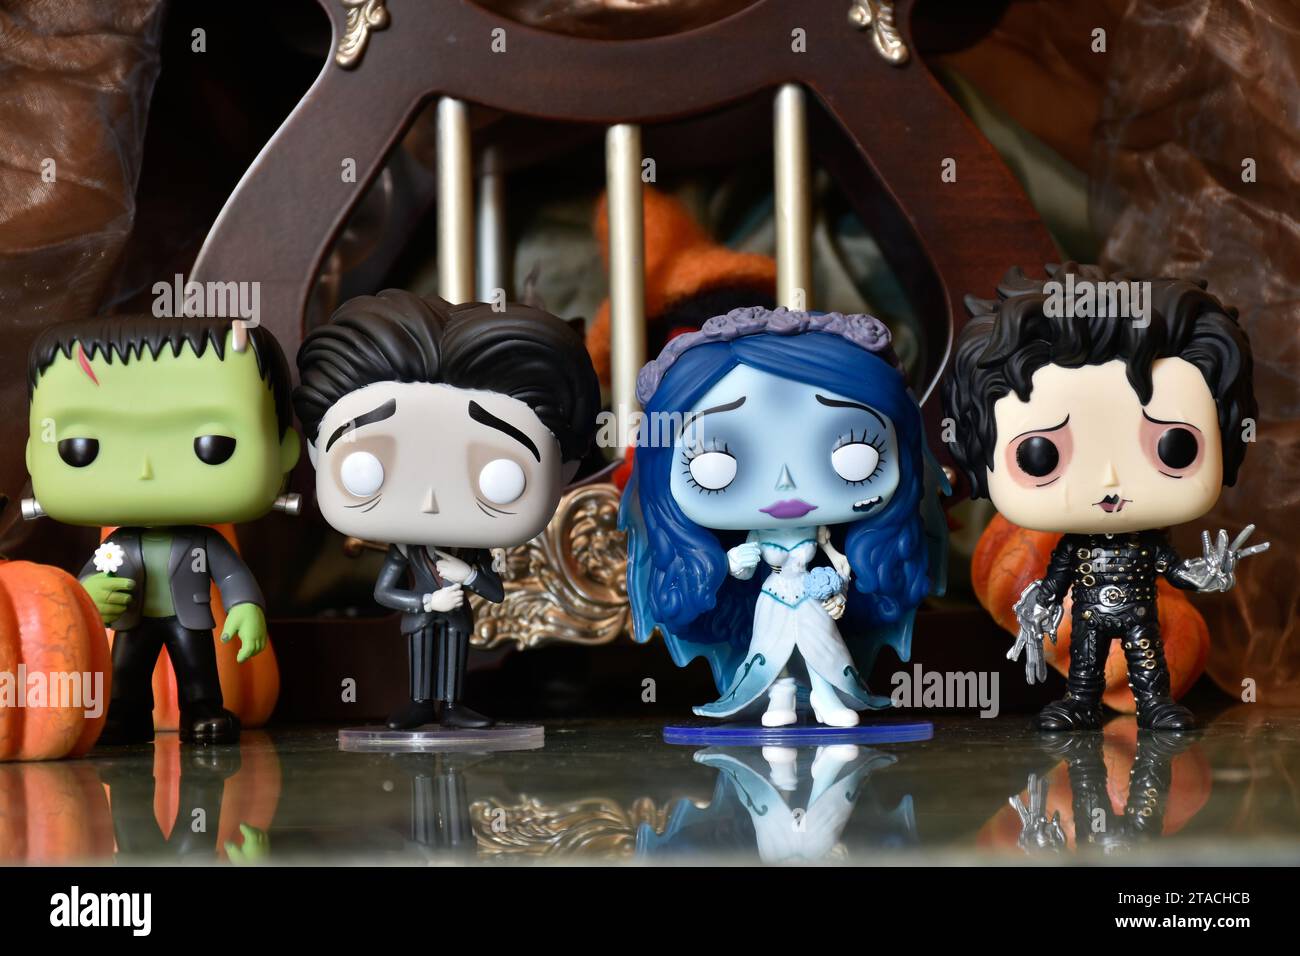 Funko Pop action figures of horror characters Frankenstein's monster, Edward Scissorhands, Emily and Victor from Corpse Bride. Halloween  decorations. Stock Photo